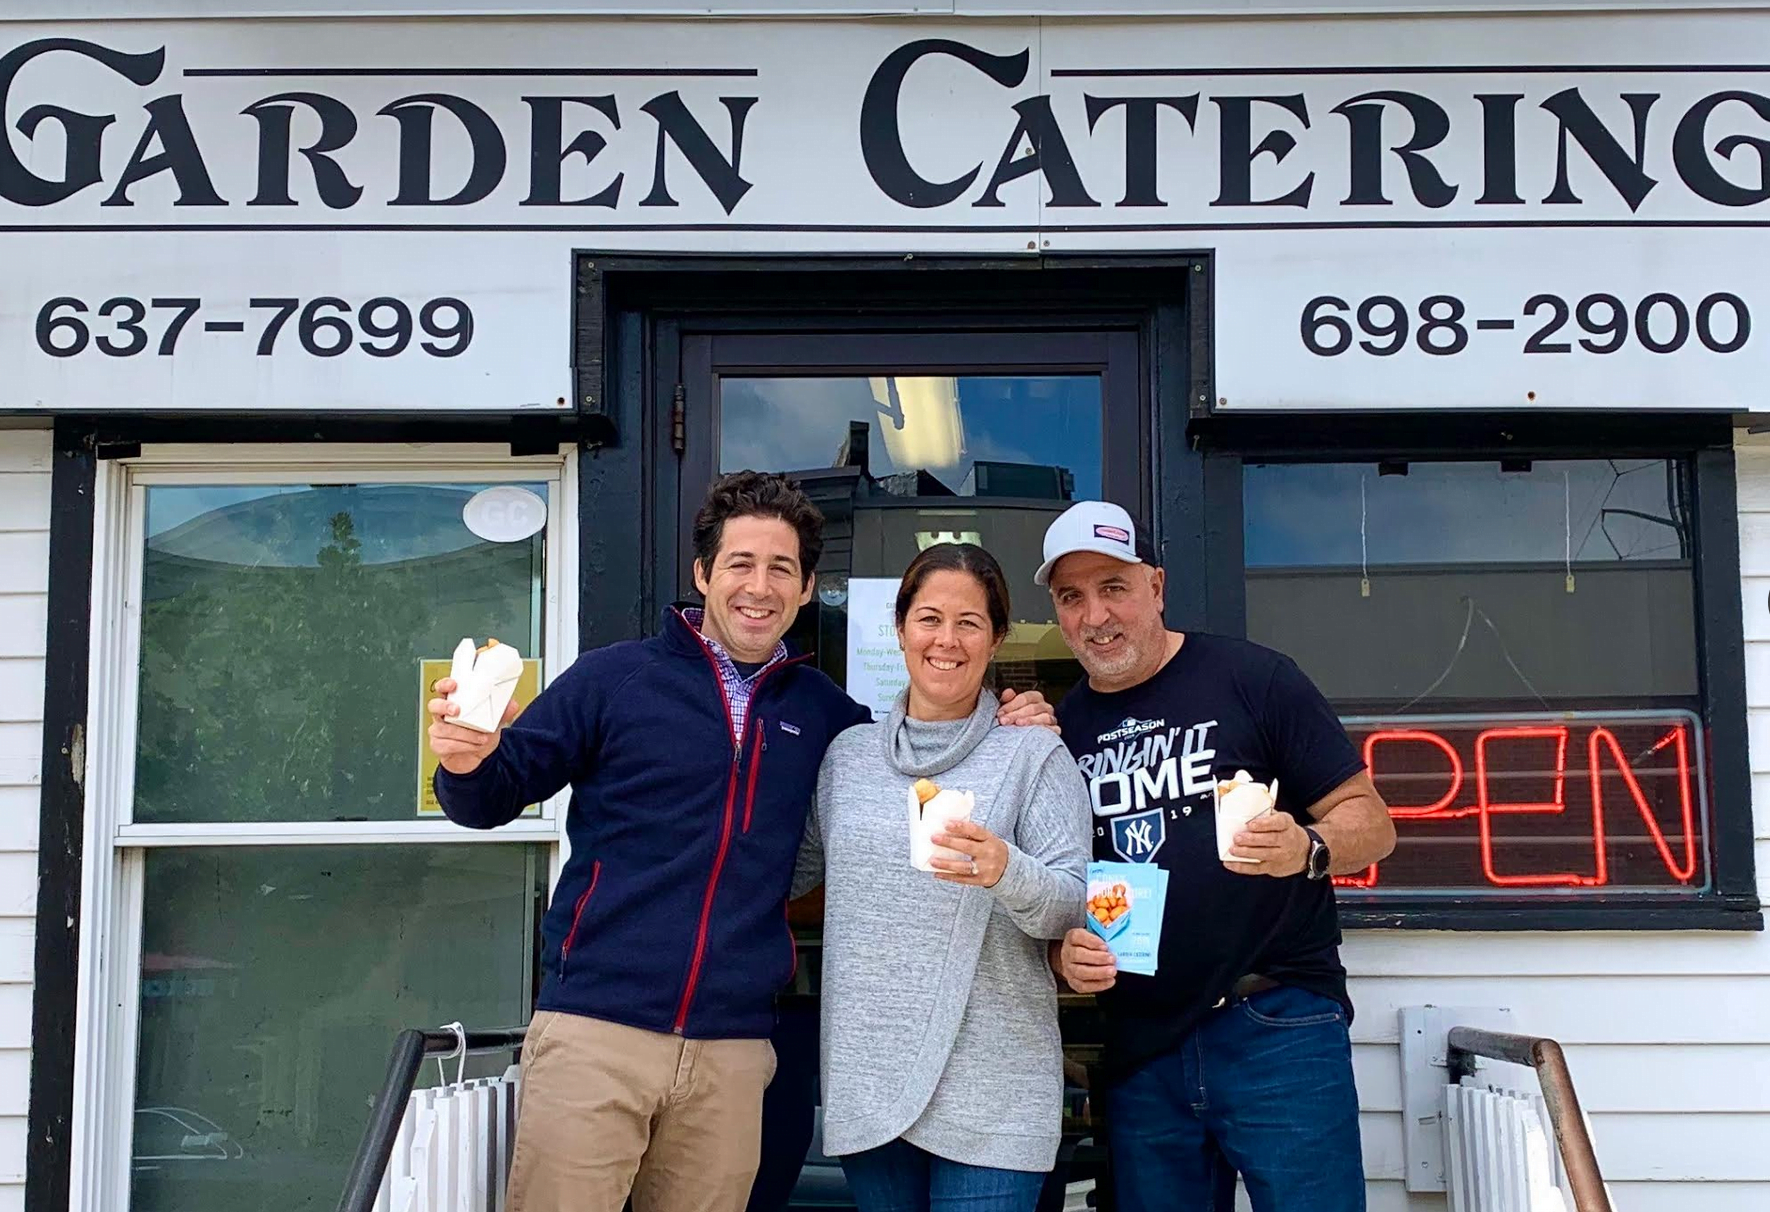 Left to right, from Garden Catering, Frank Carpenteri (Owner), Tina Carpenteri (Owner), and Mike Paoletta (Manager). Contributed photo